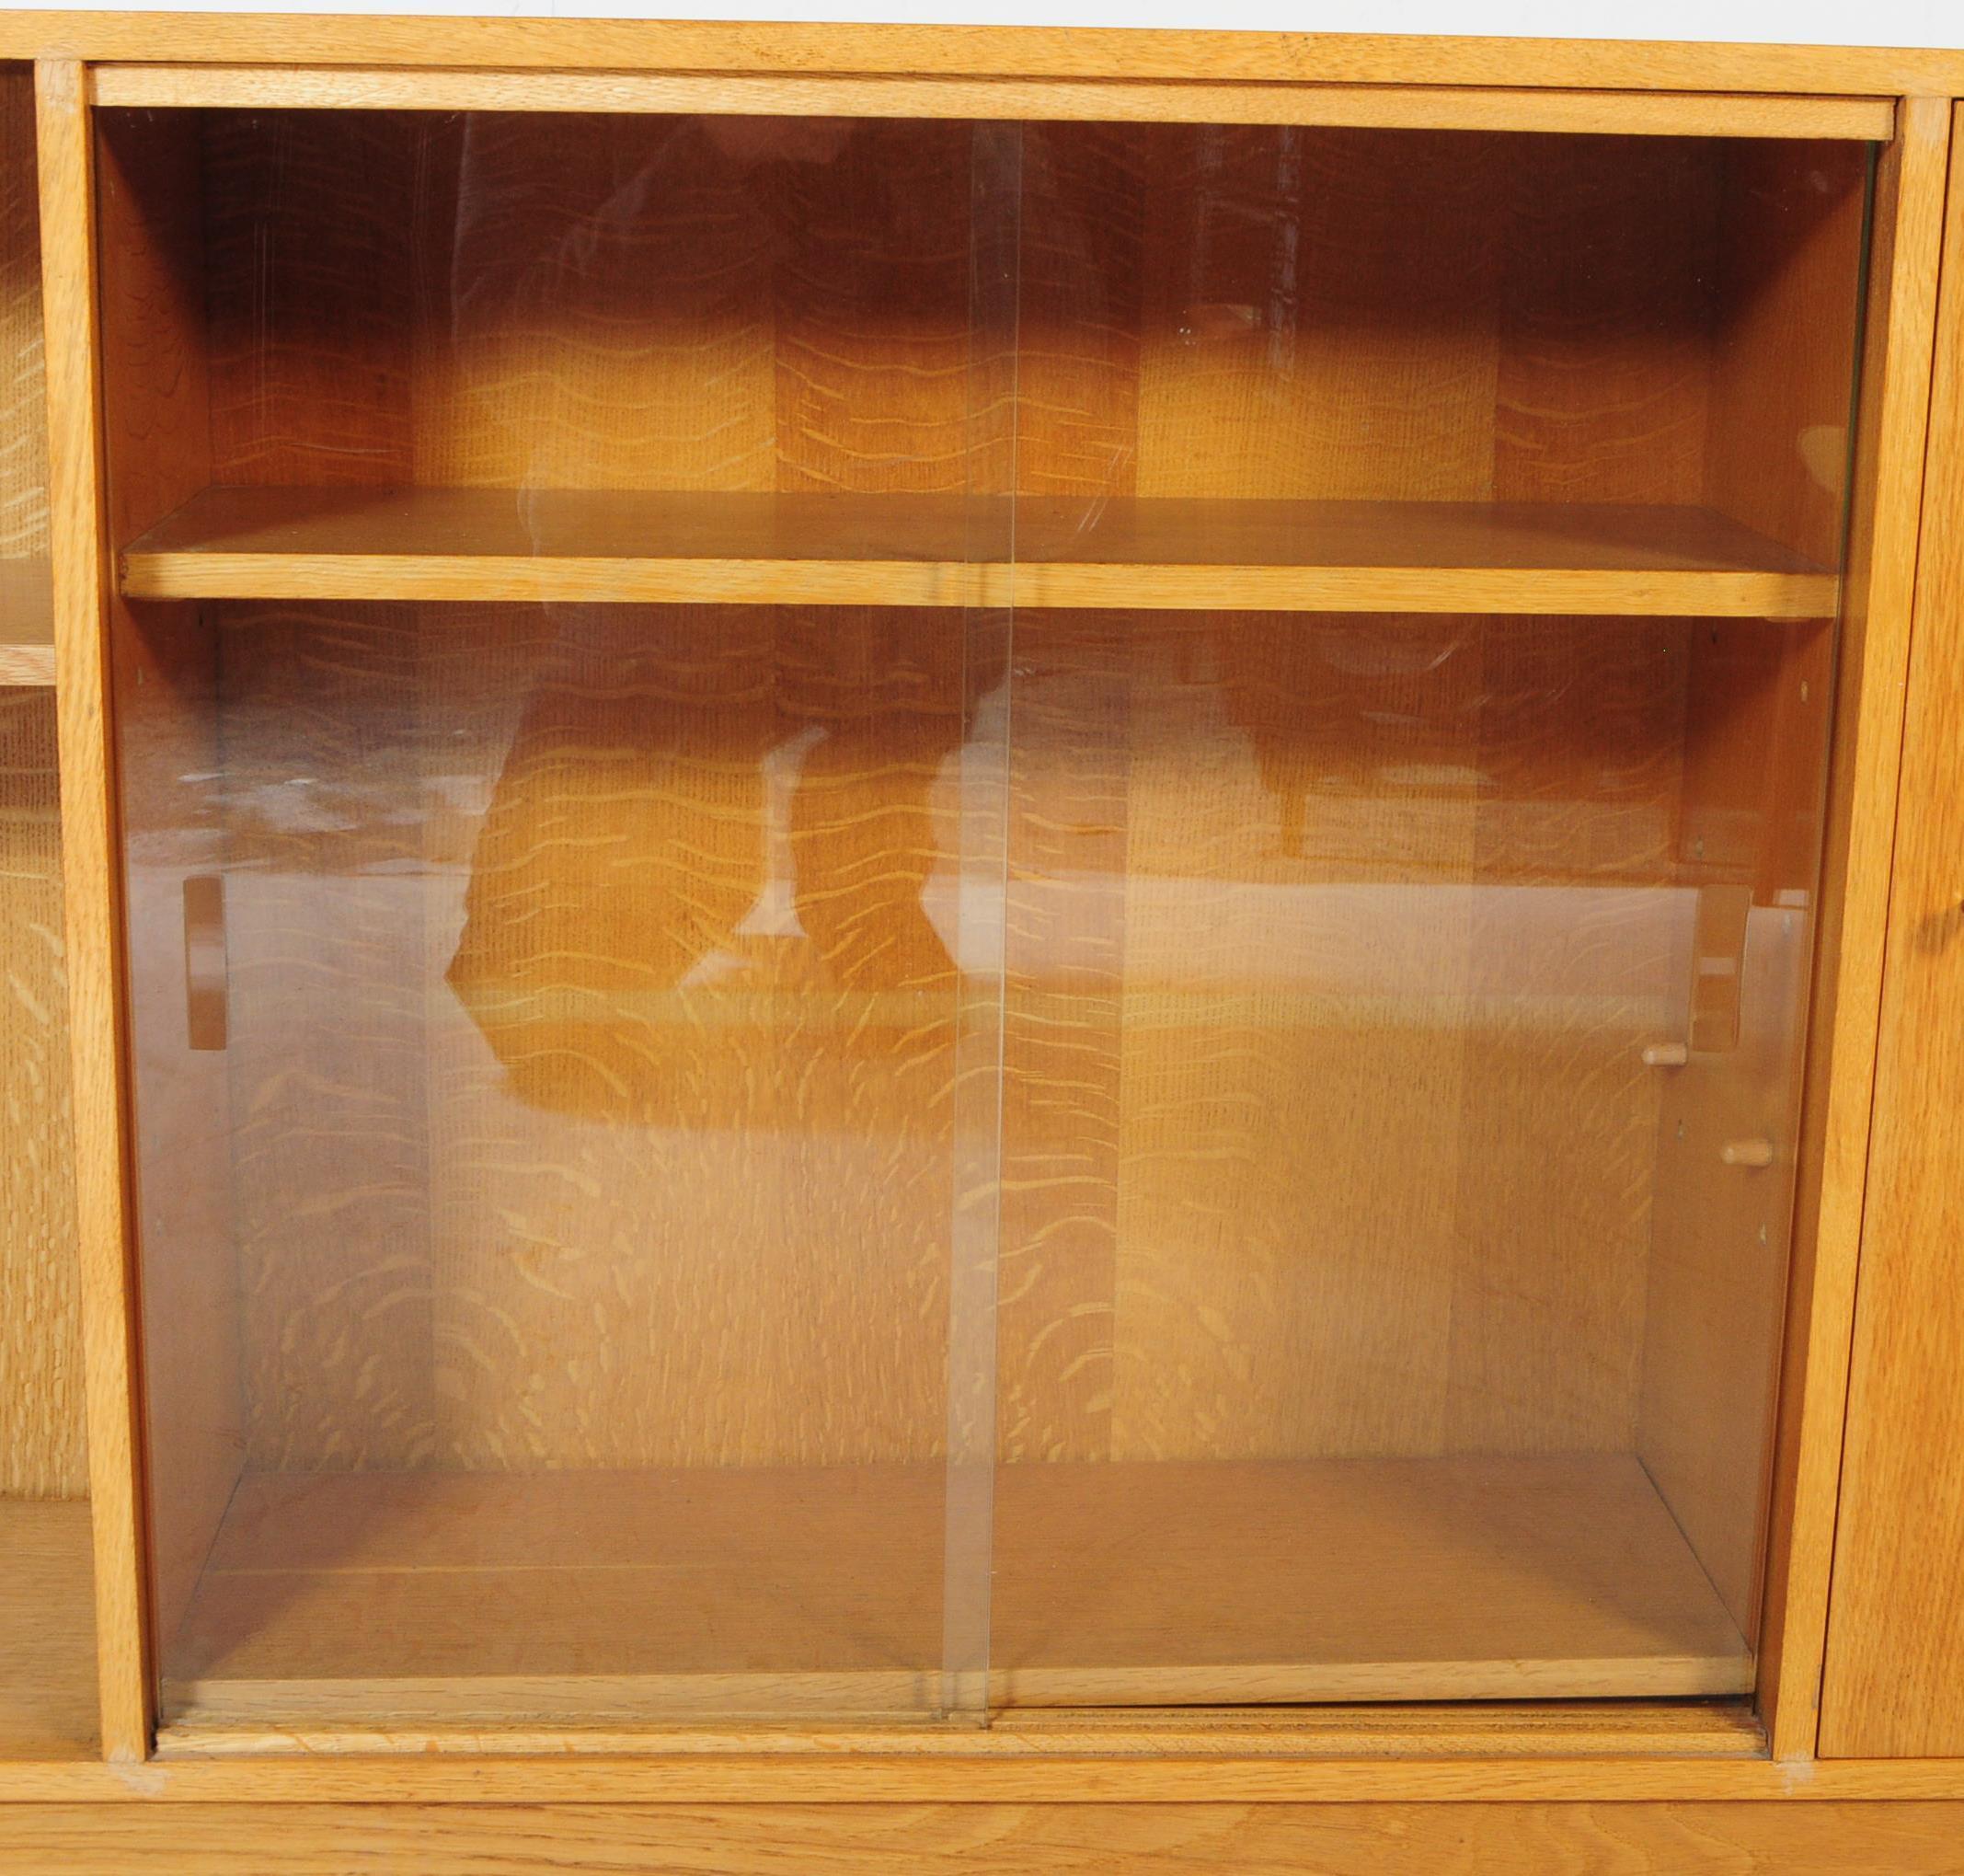 VINTAGE MID 20TH CENTURY OAK DISPLAY WALL UNIT / BOOKCASE - Image 3 of 6